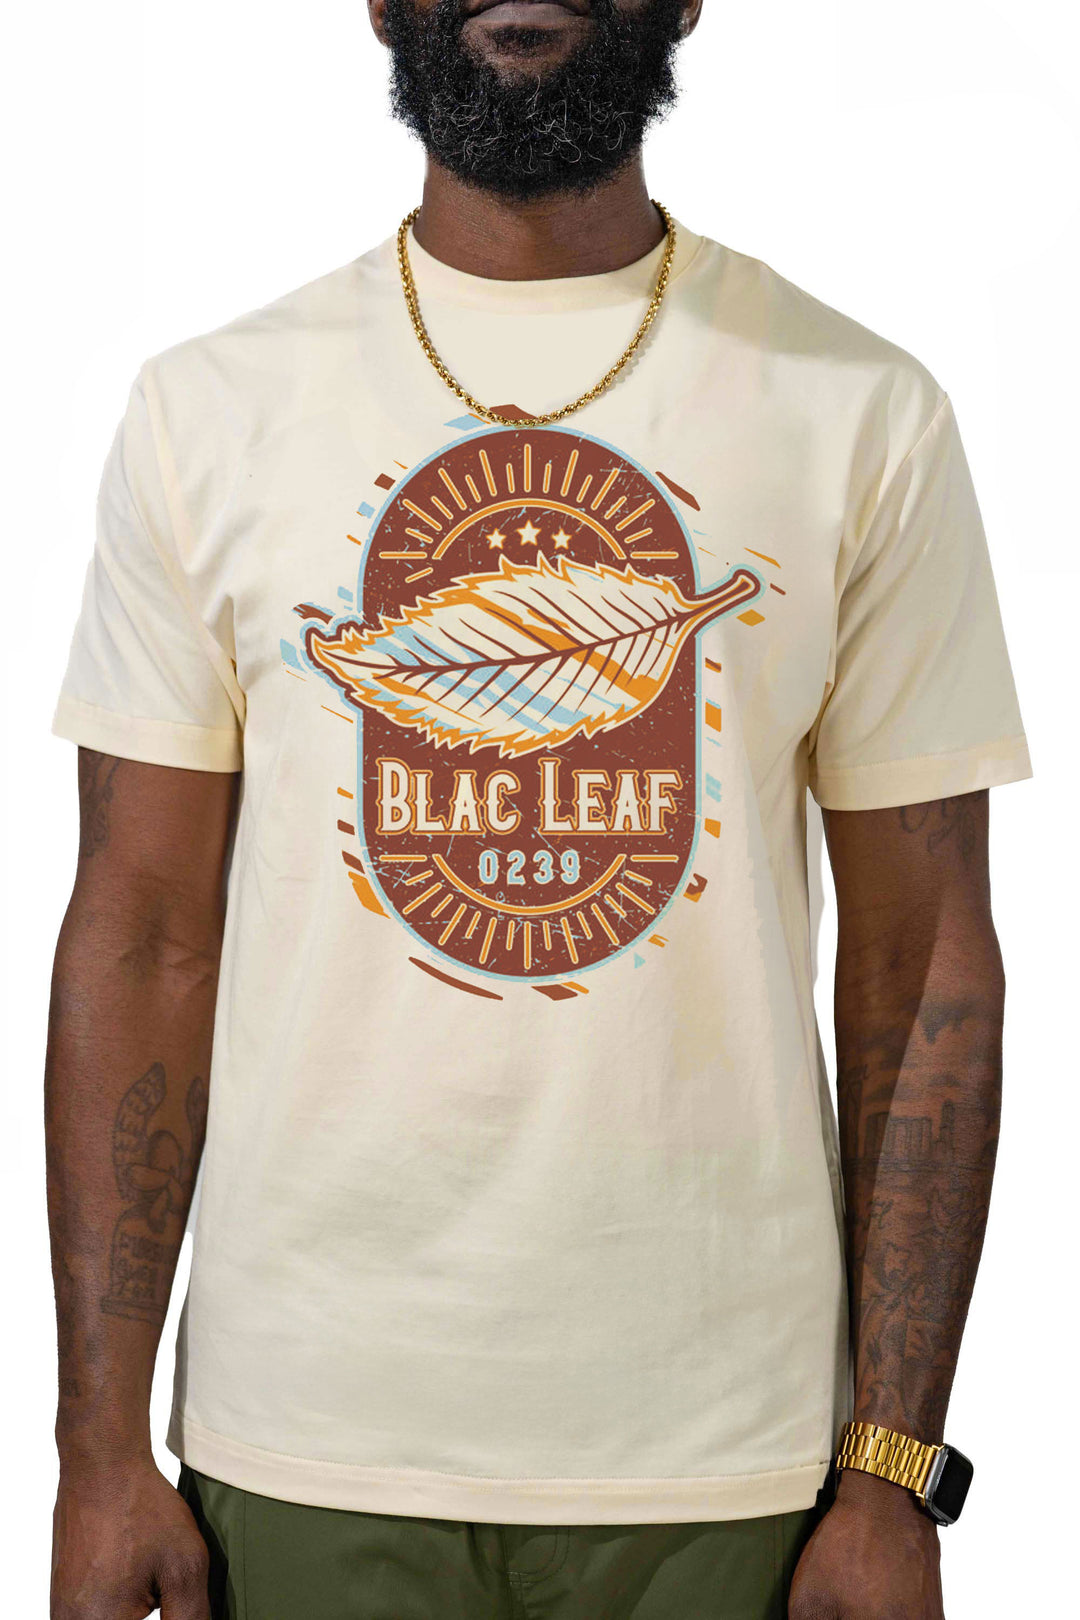 Blac Leaf Hold On To Your Values 2 Shirt